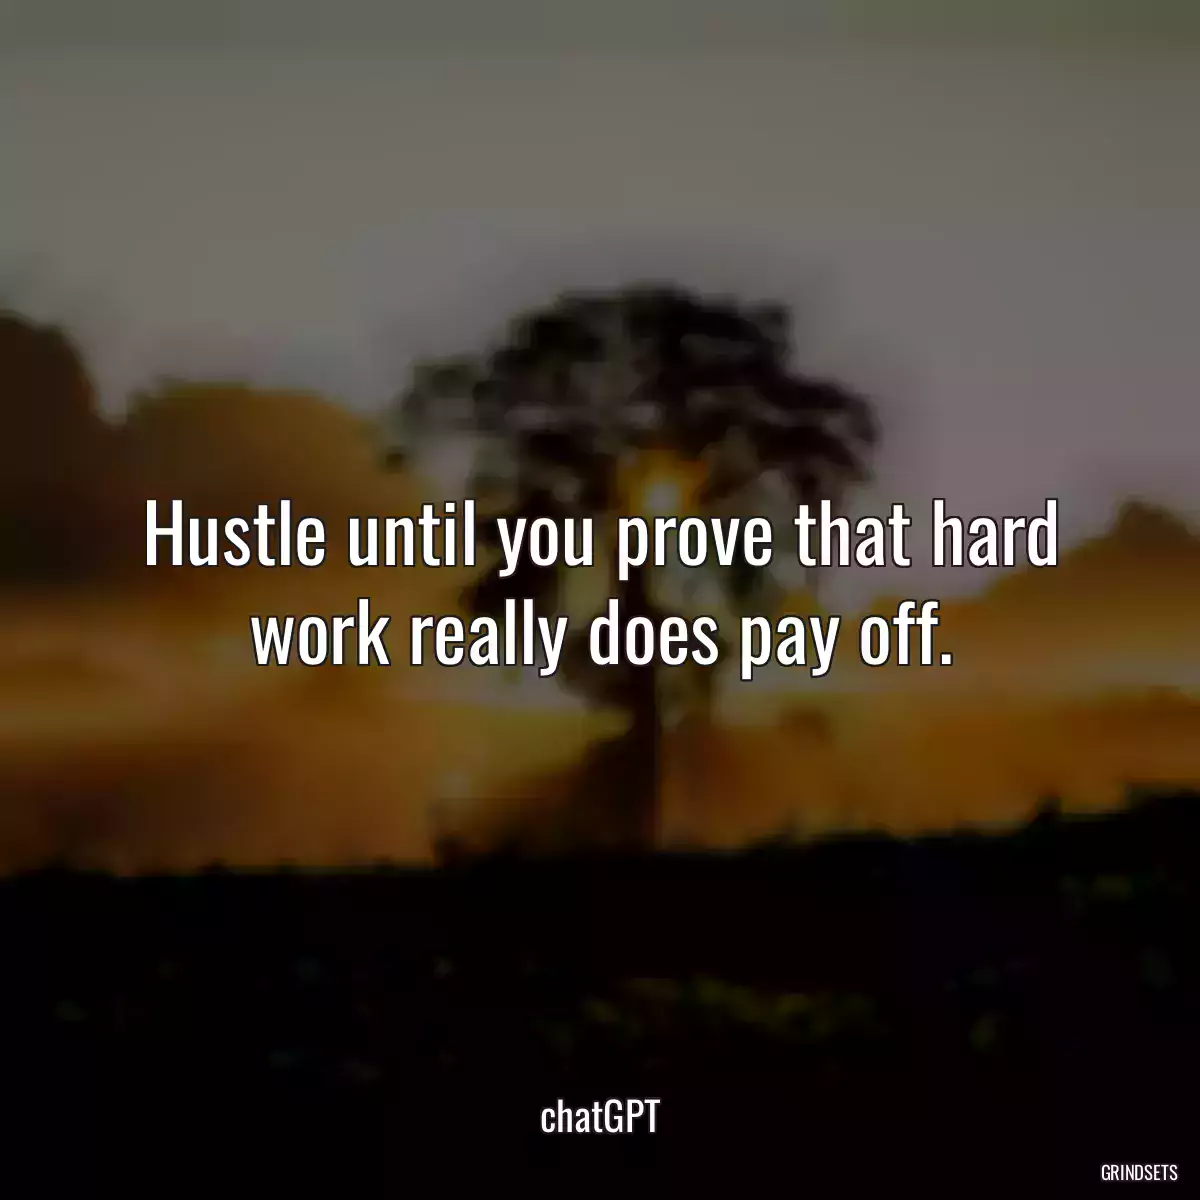 Hustle until you prove that hard work really does pay off.